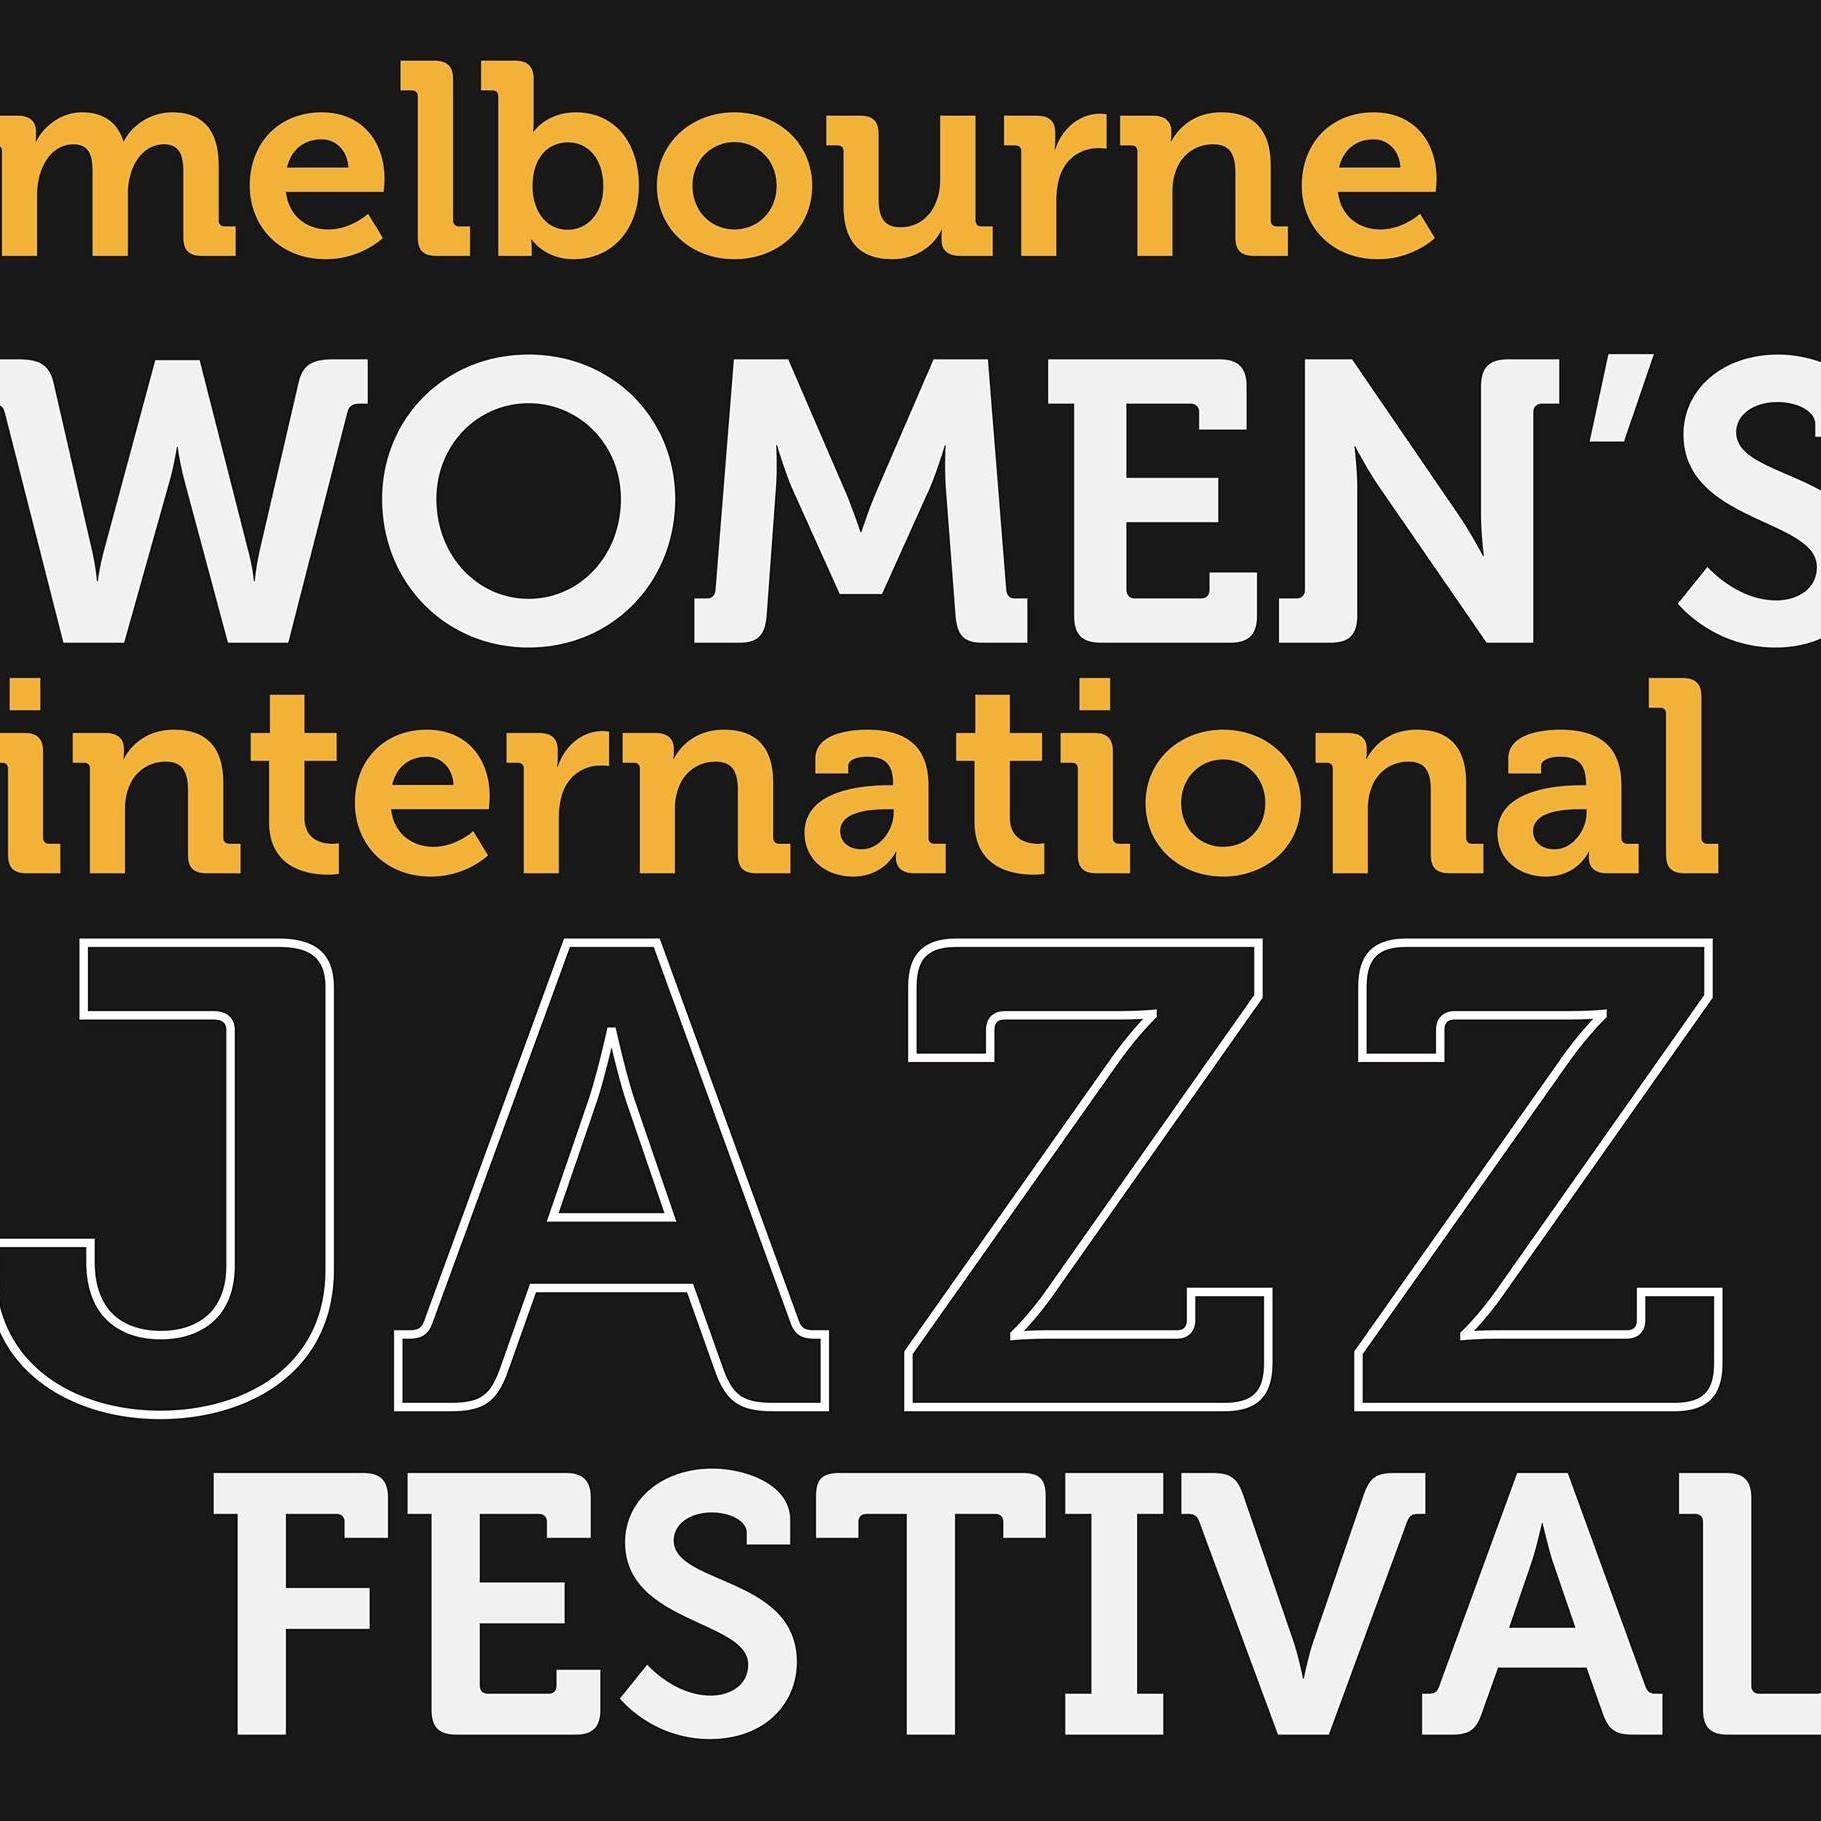 Women’s Jazz Festival Live and In-Person